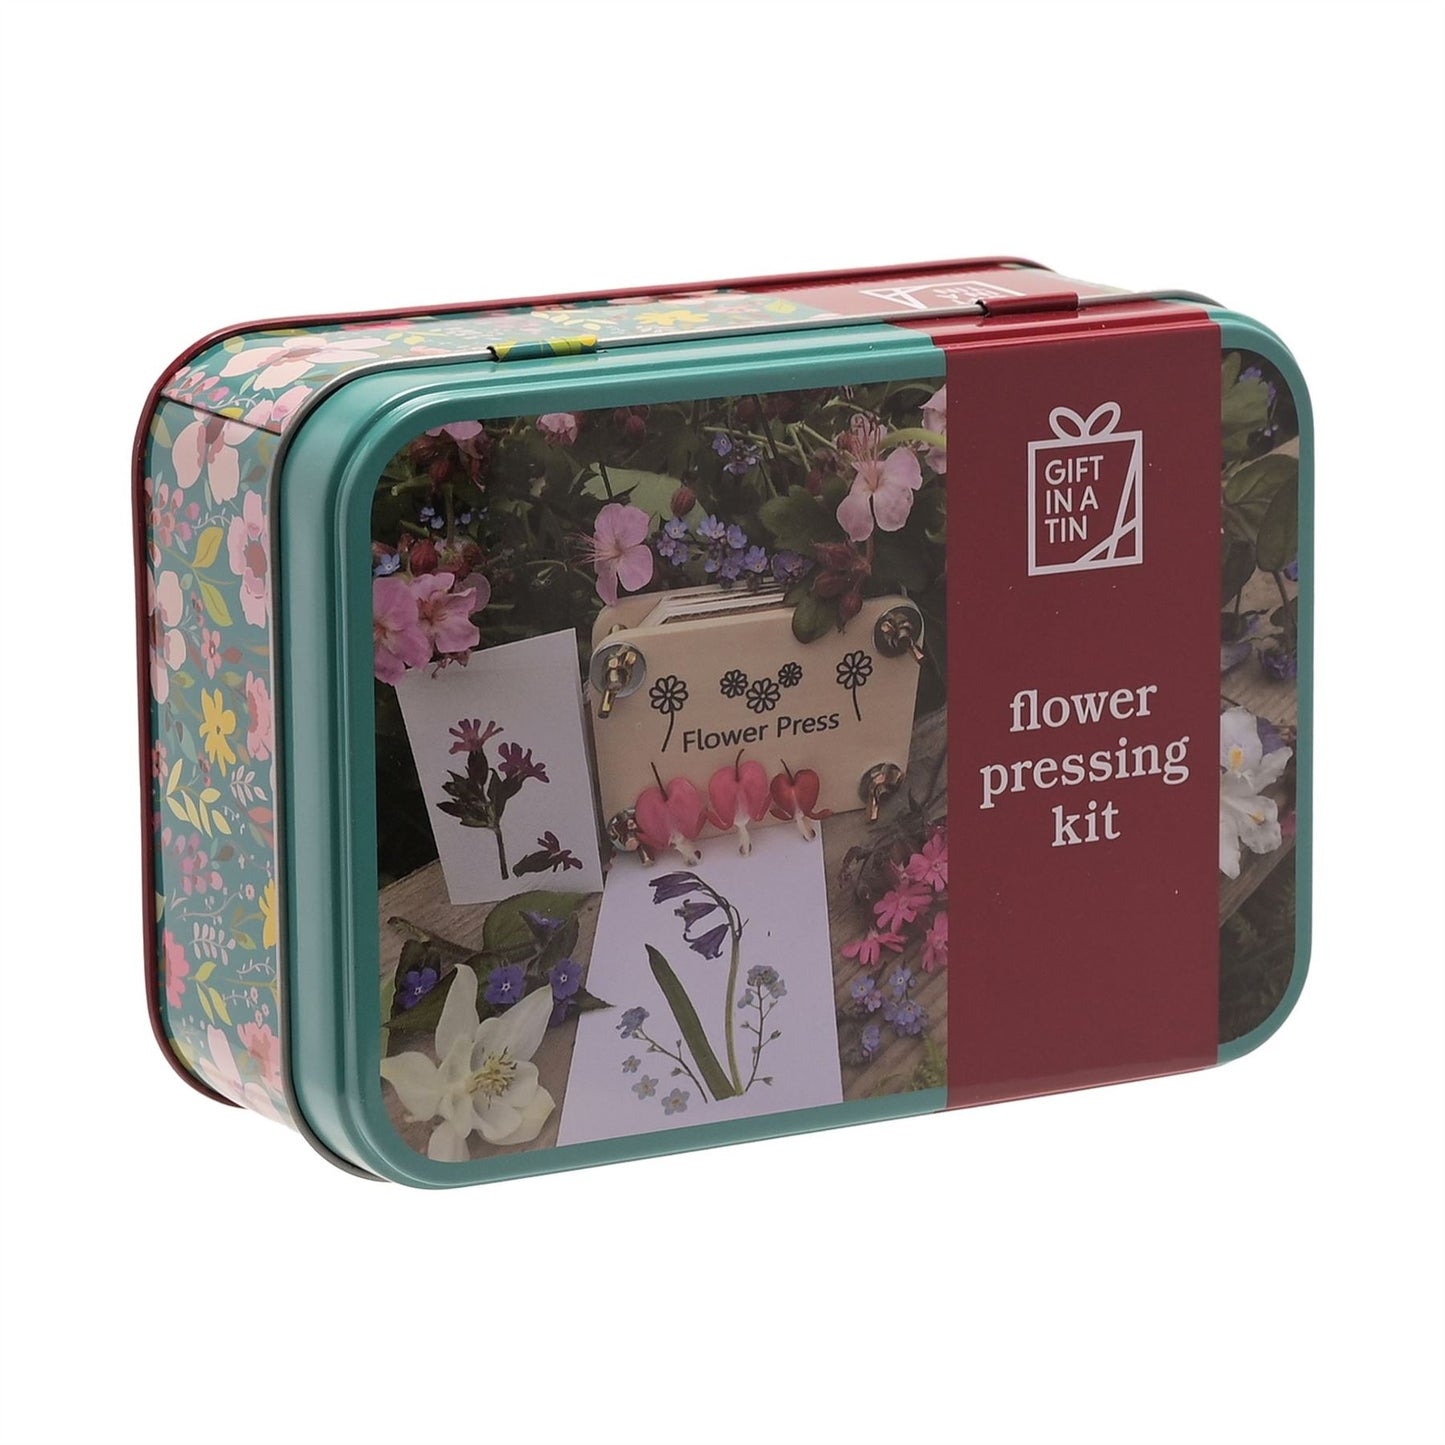 Apples To Pears Gifts For Grown Ups Flower Pressing Kit Tin